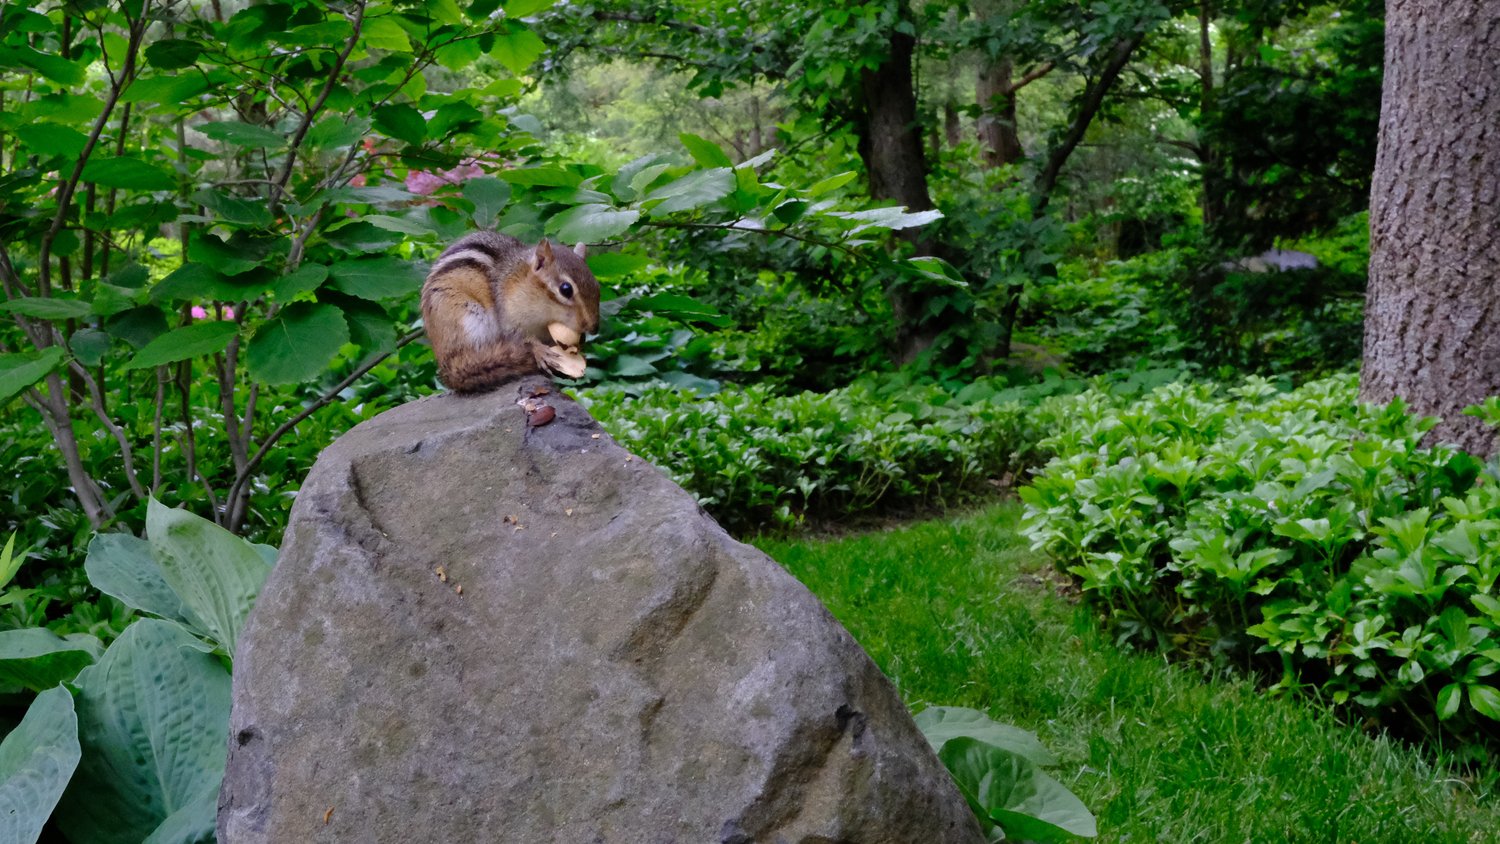 Two feet away from a chipmunk on a rock.